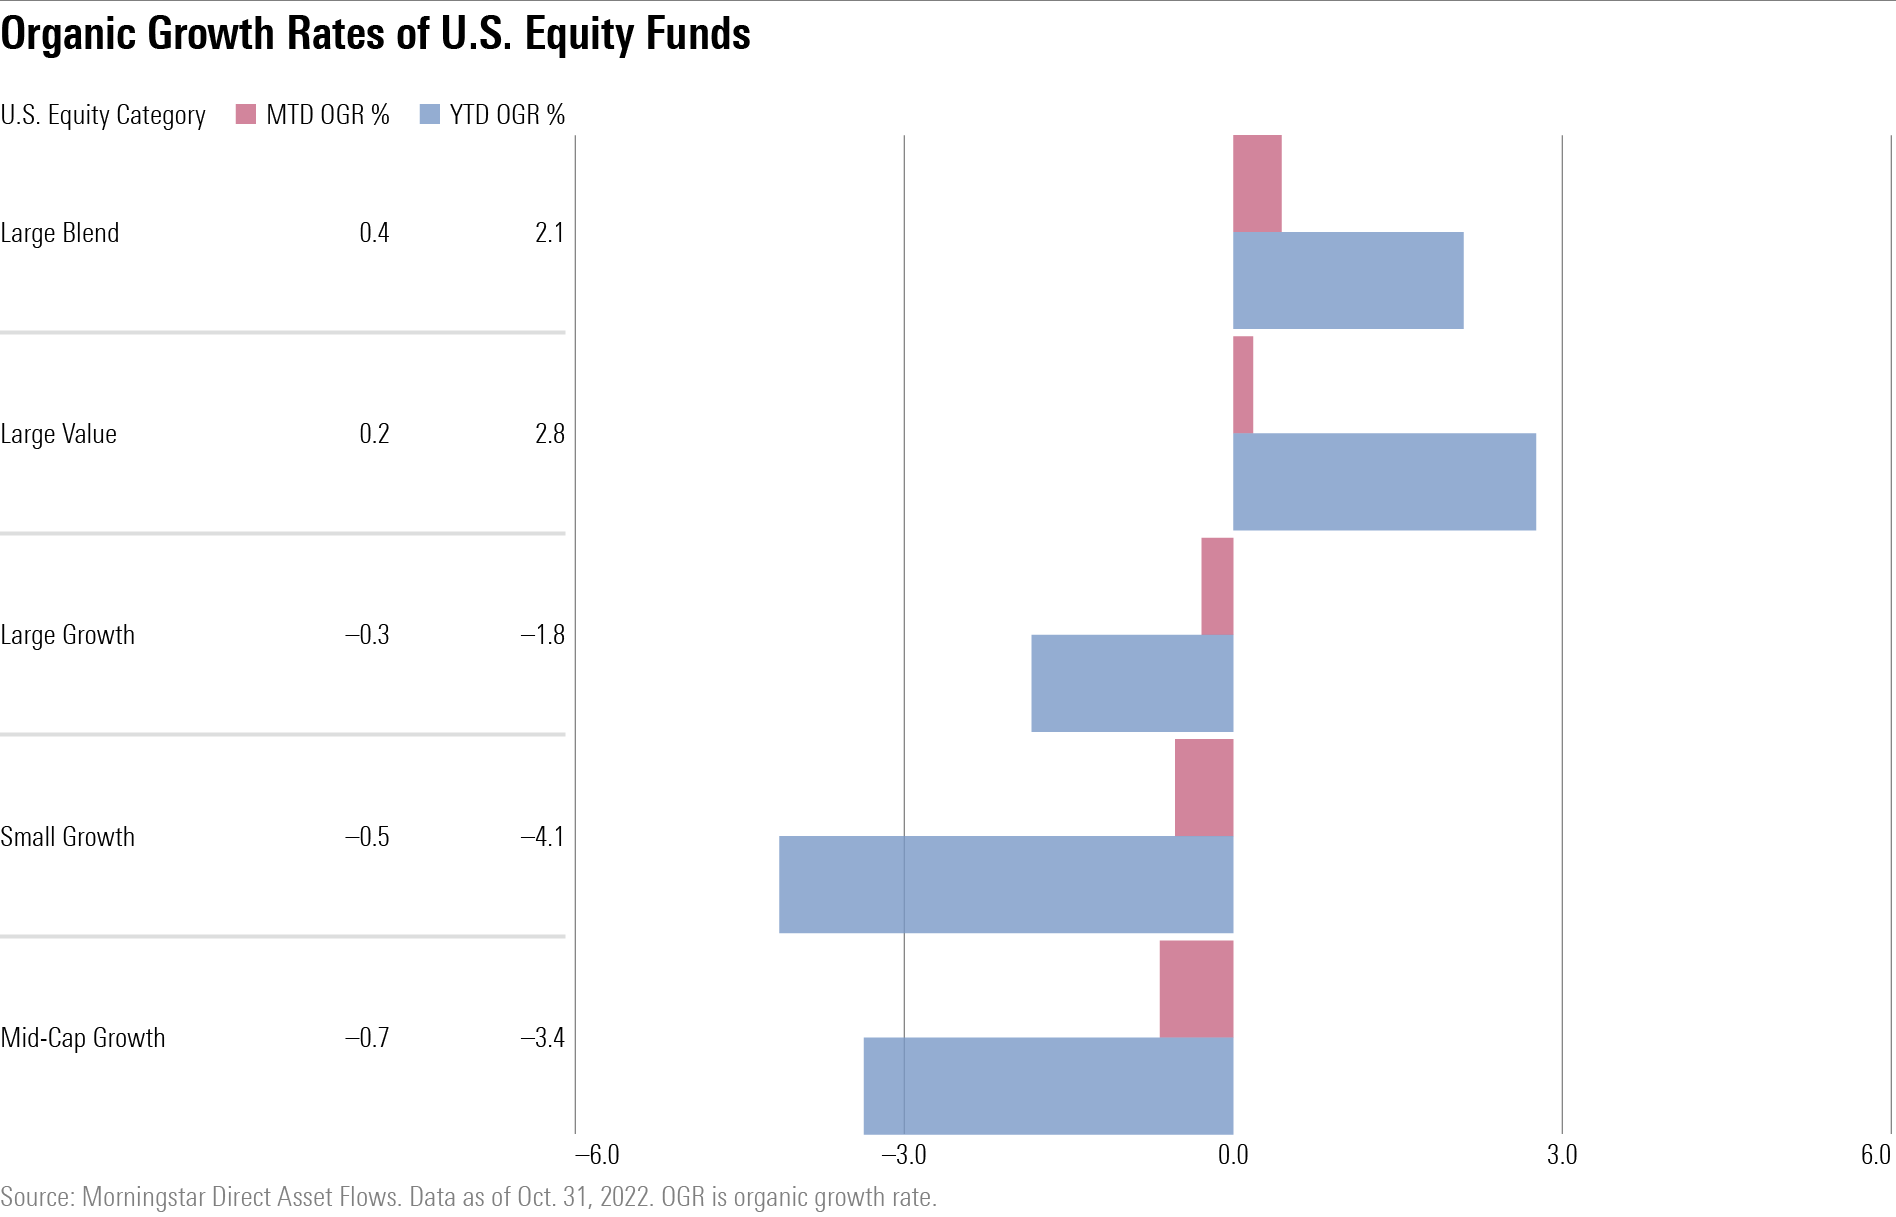 Small-, mid-, and large-growth funds all experienced outflows during the month, but large-blend and large-value funds had inflows.